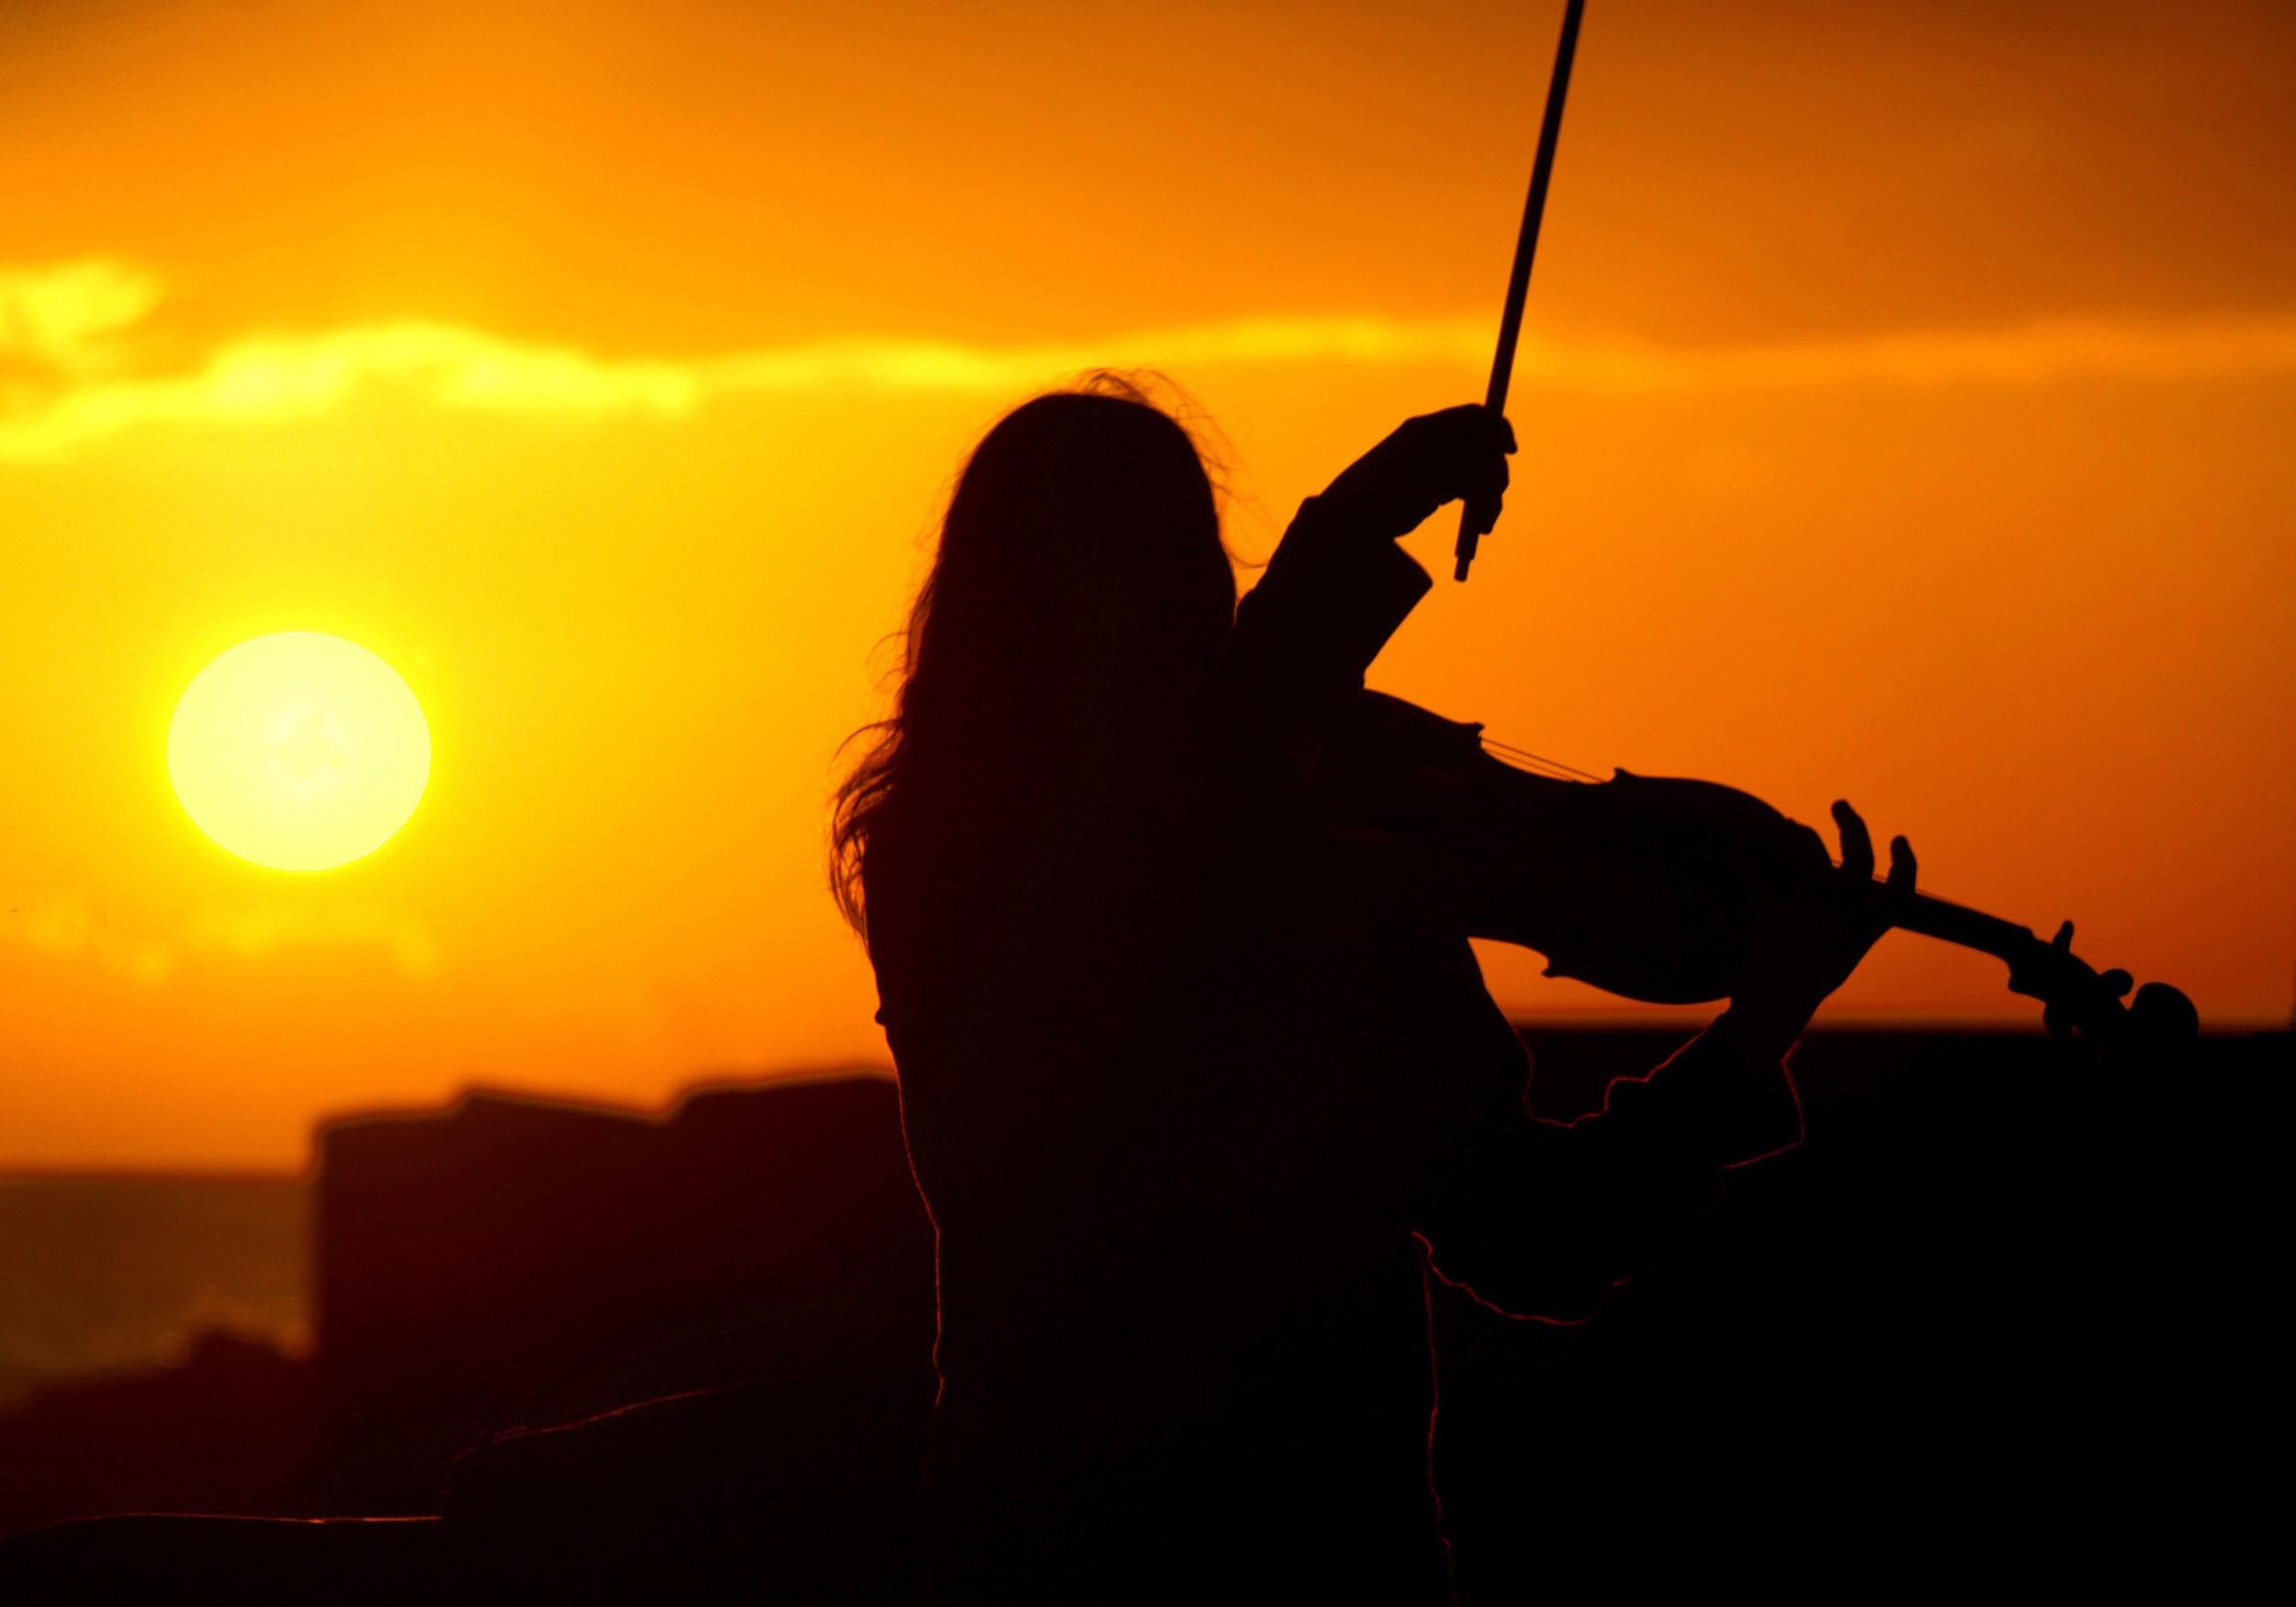 Silhouette of a woman playing violin with a fiery orange sunset and ocean behind her